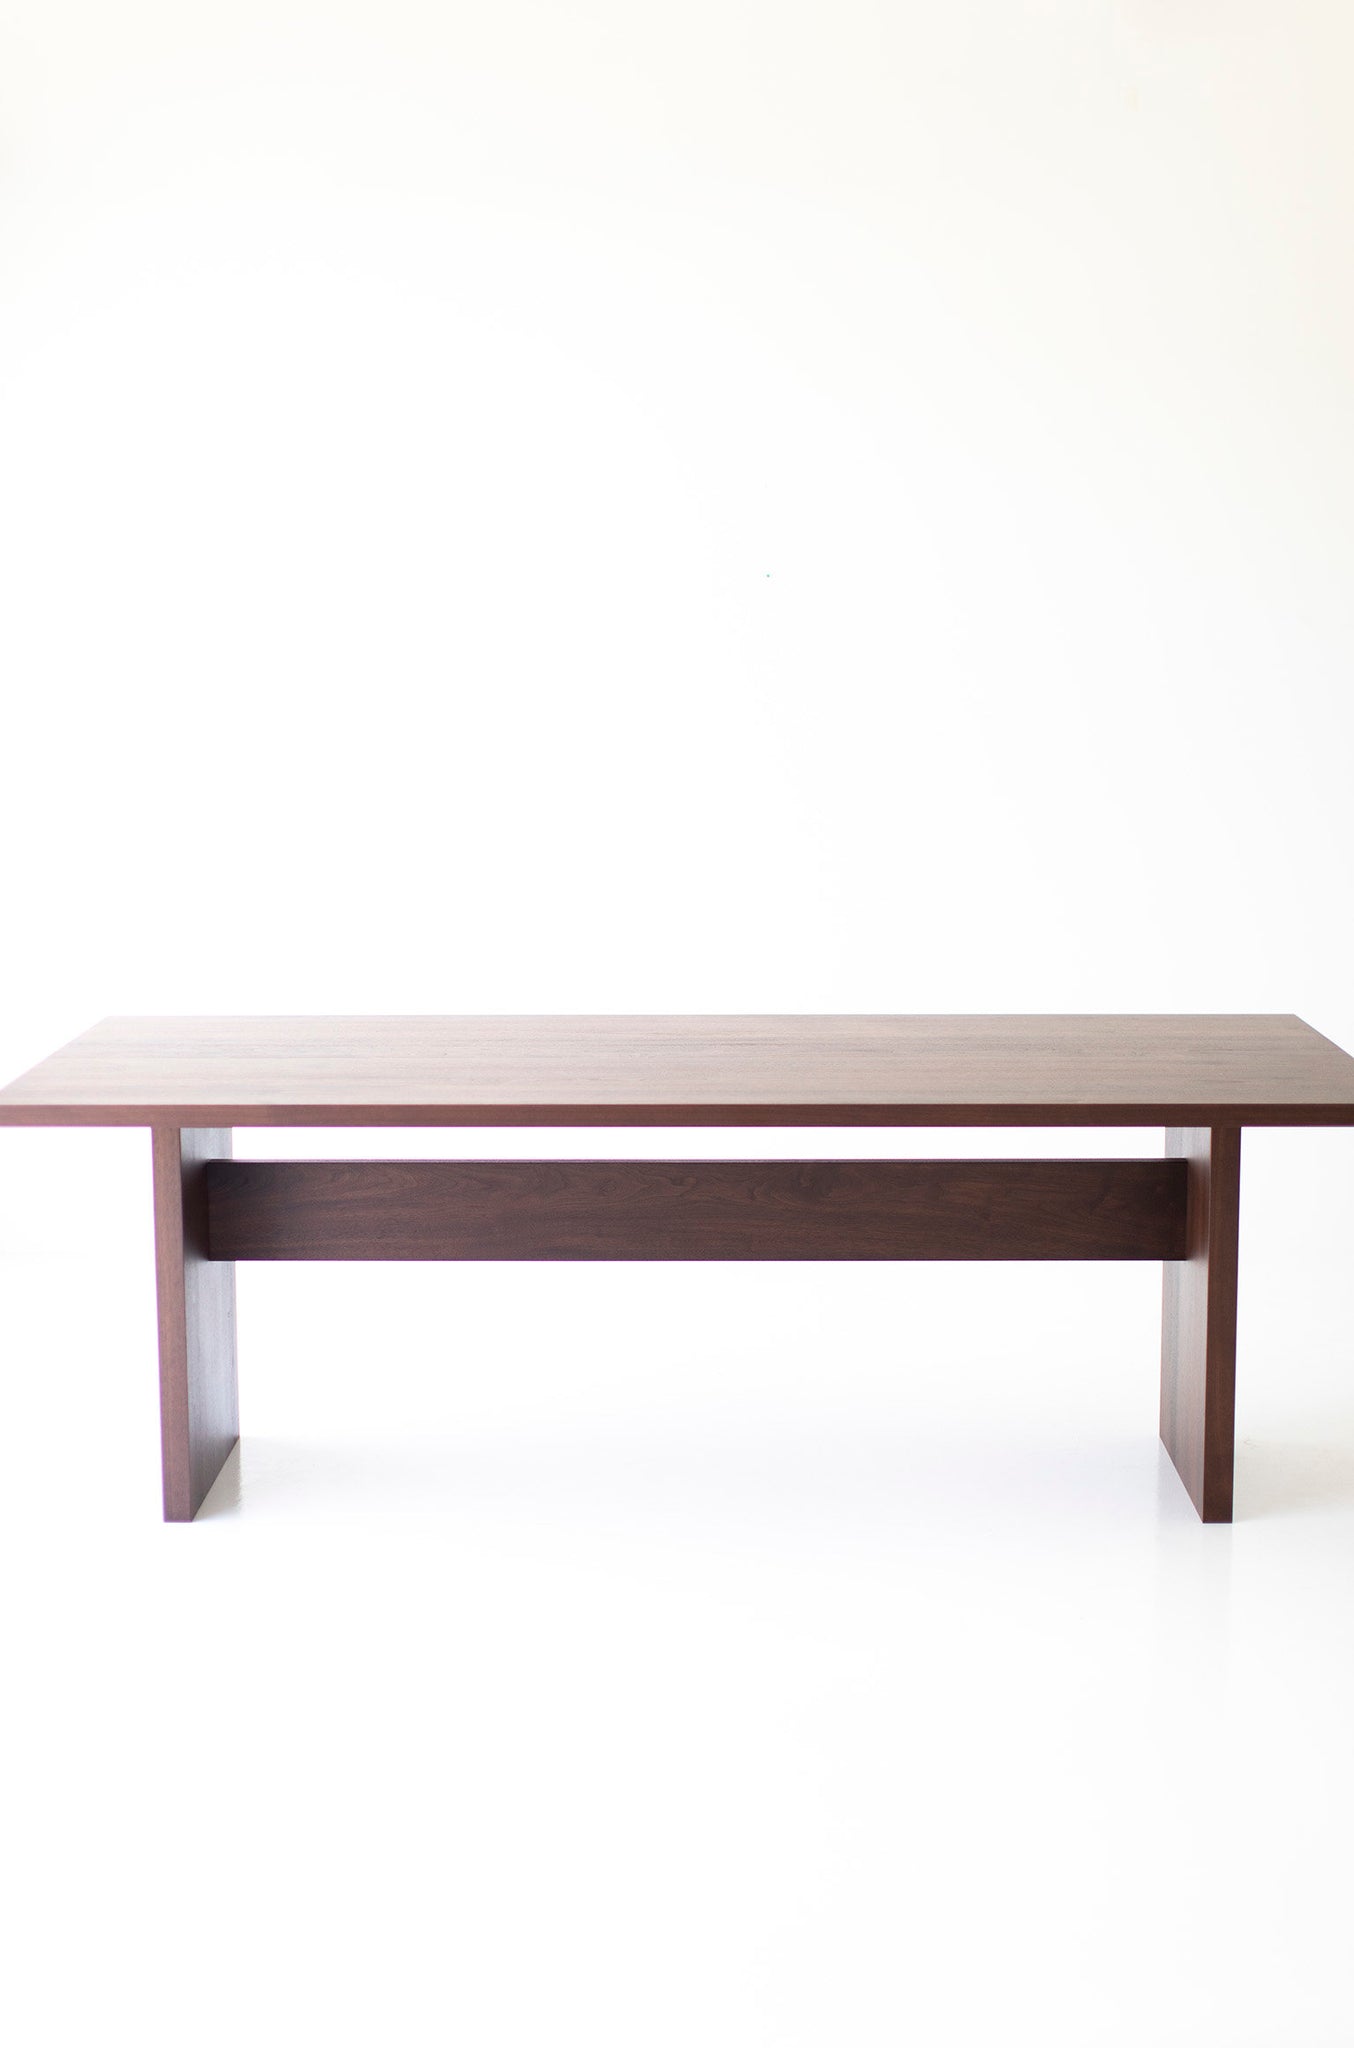 Modern Dining Table 0718 Toko Table, Image 11